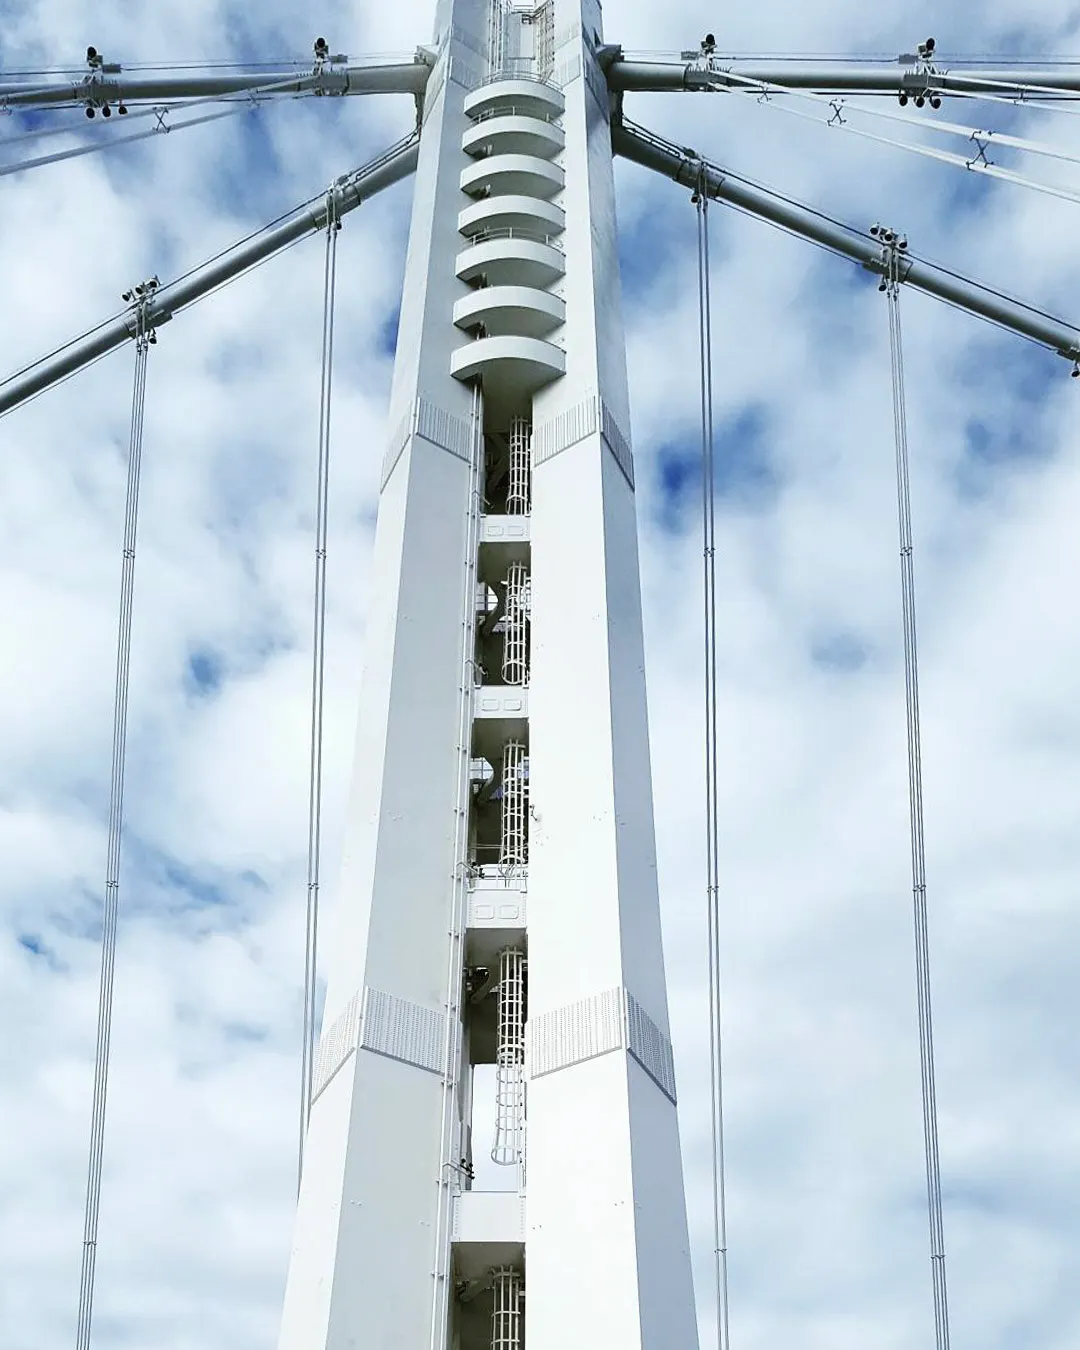 A photograph of a close-up view of a bridge tower and cable structure set against a cloudy blue sky. 